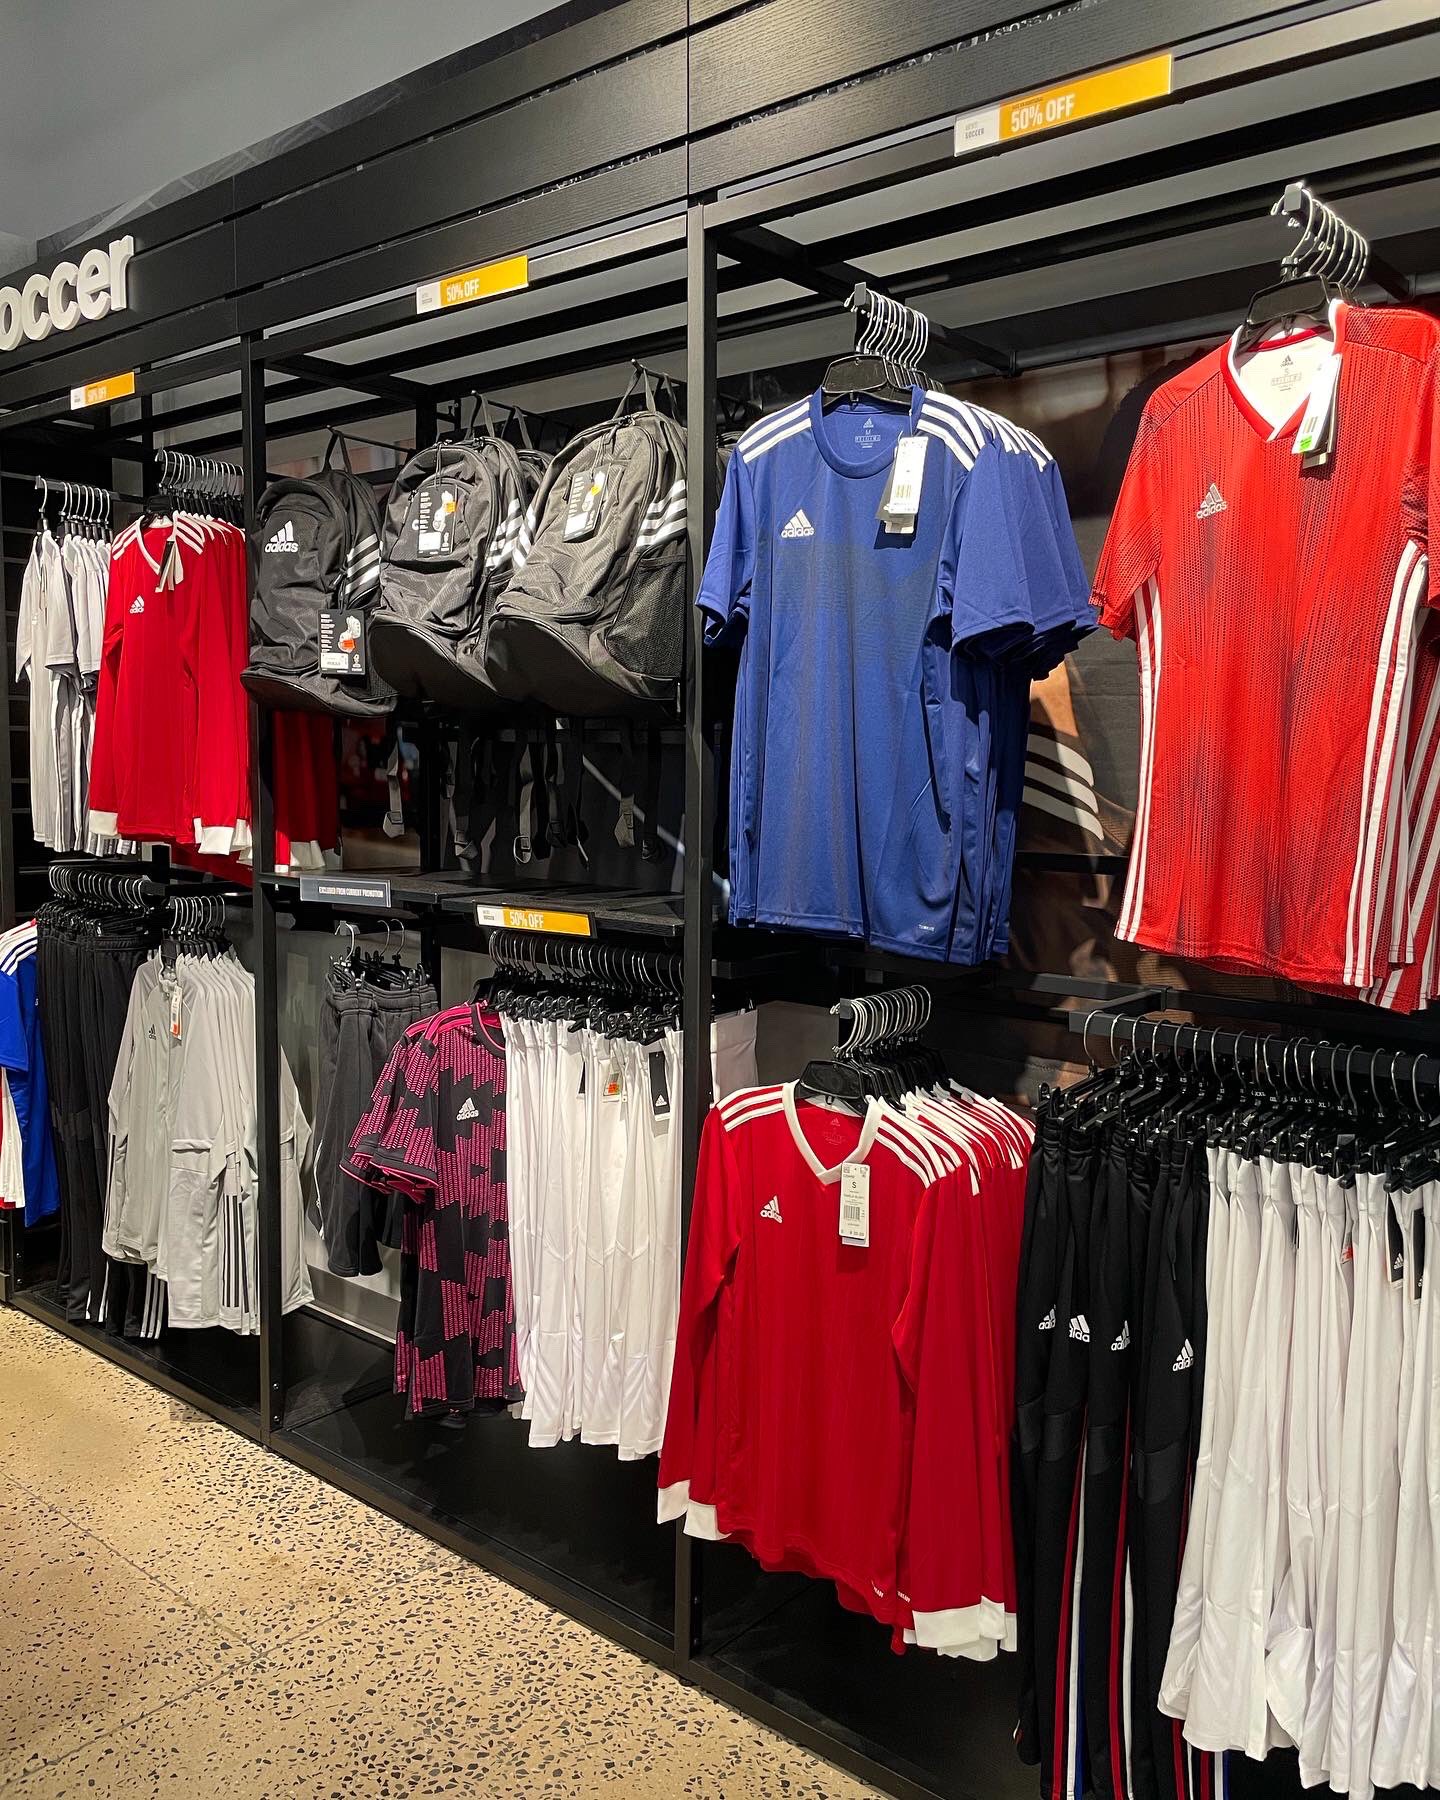 OutletAtGettysburg on Twitter: "50% OFF STOREWIDE AT ADIDAS OUTLET STORE GETTYSBURG! 👟 *Some exclusions may apply. #gettysburgoutlets #gettysburg # adidas #adidasoutlet #sportswear #activewear #fitness #fitnesswear #fitnessgear #sneakers ...